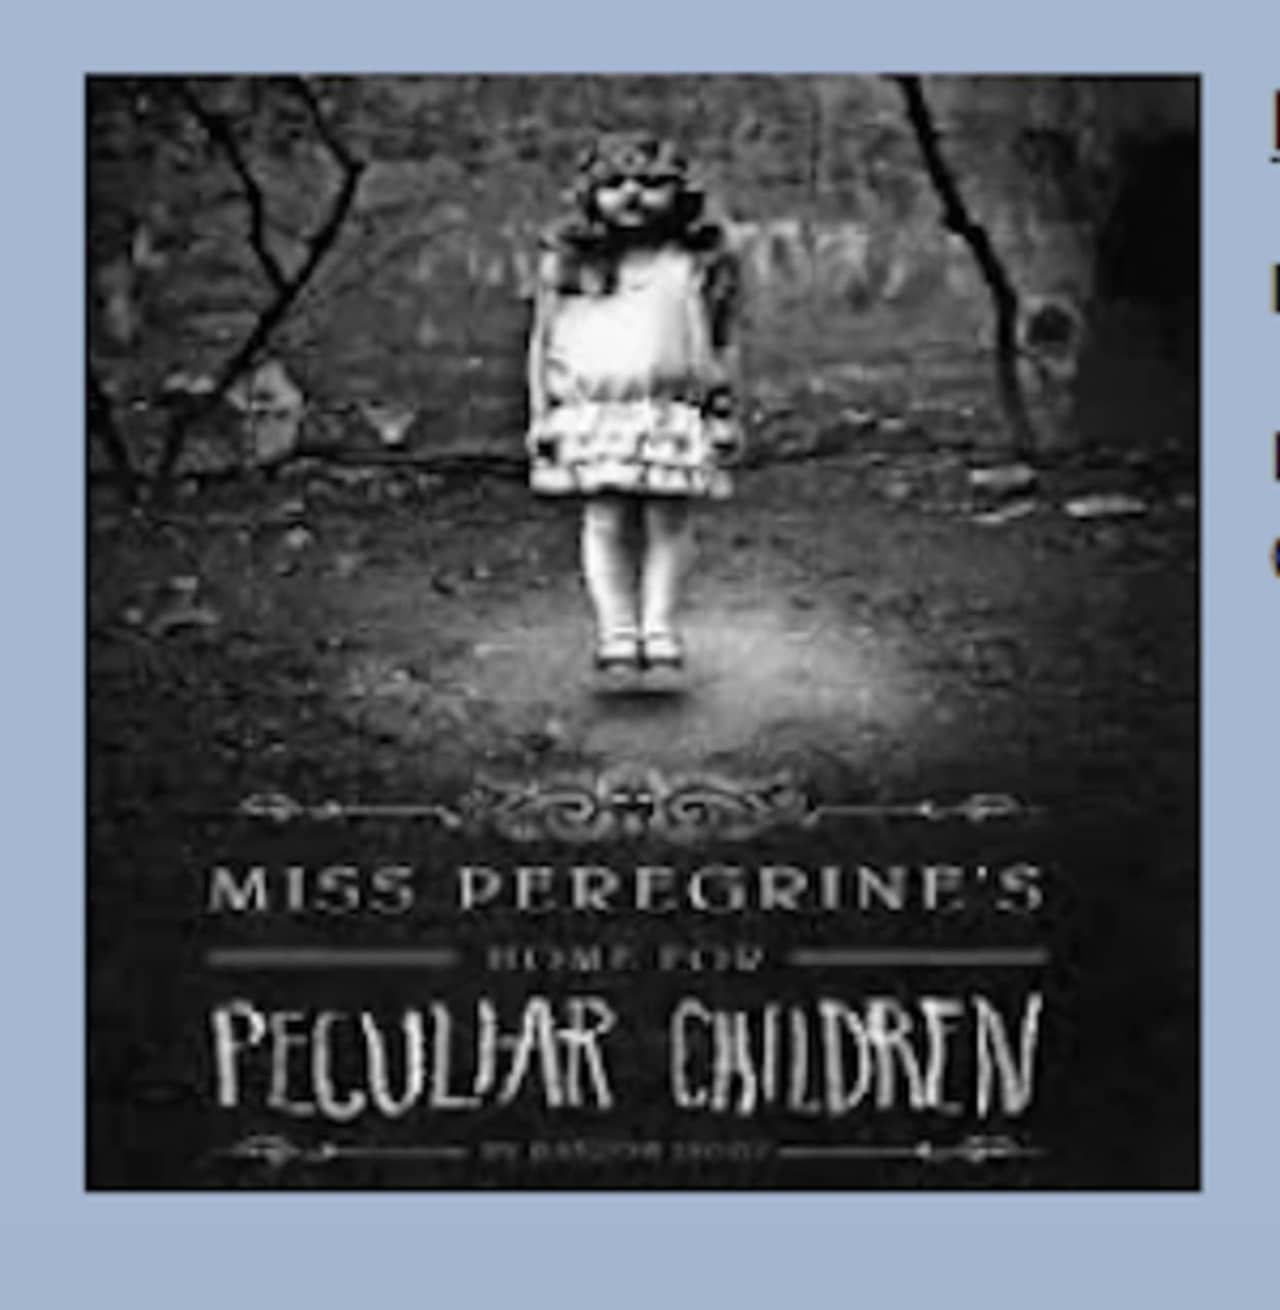 New Canaan Library's Pizza & Pages discussion group is reading "Miss Peregrine's Home for Peculiar Children" by Ransom Rigs this month.